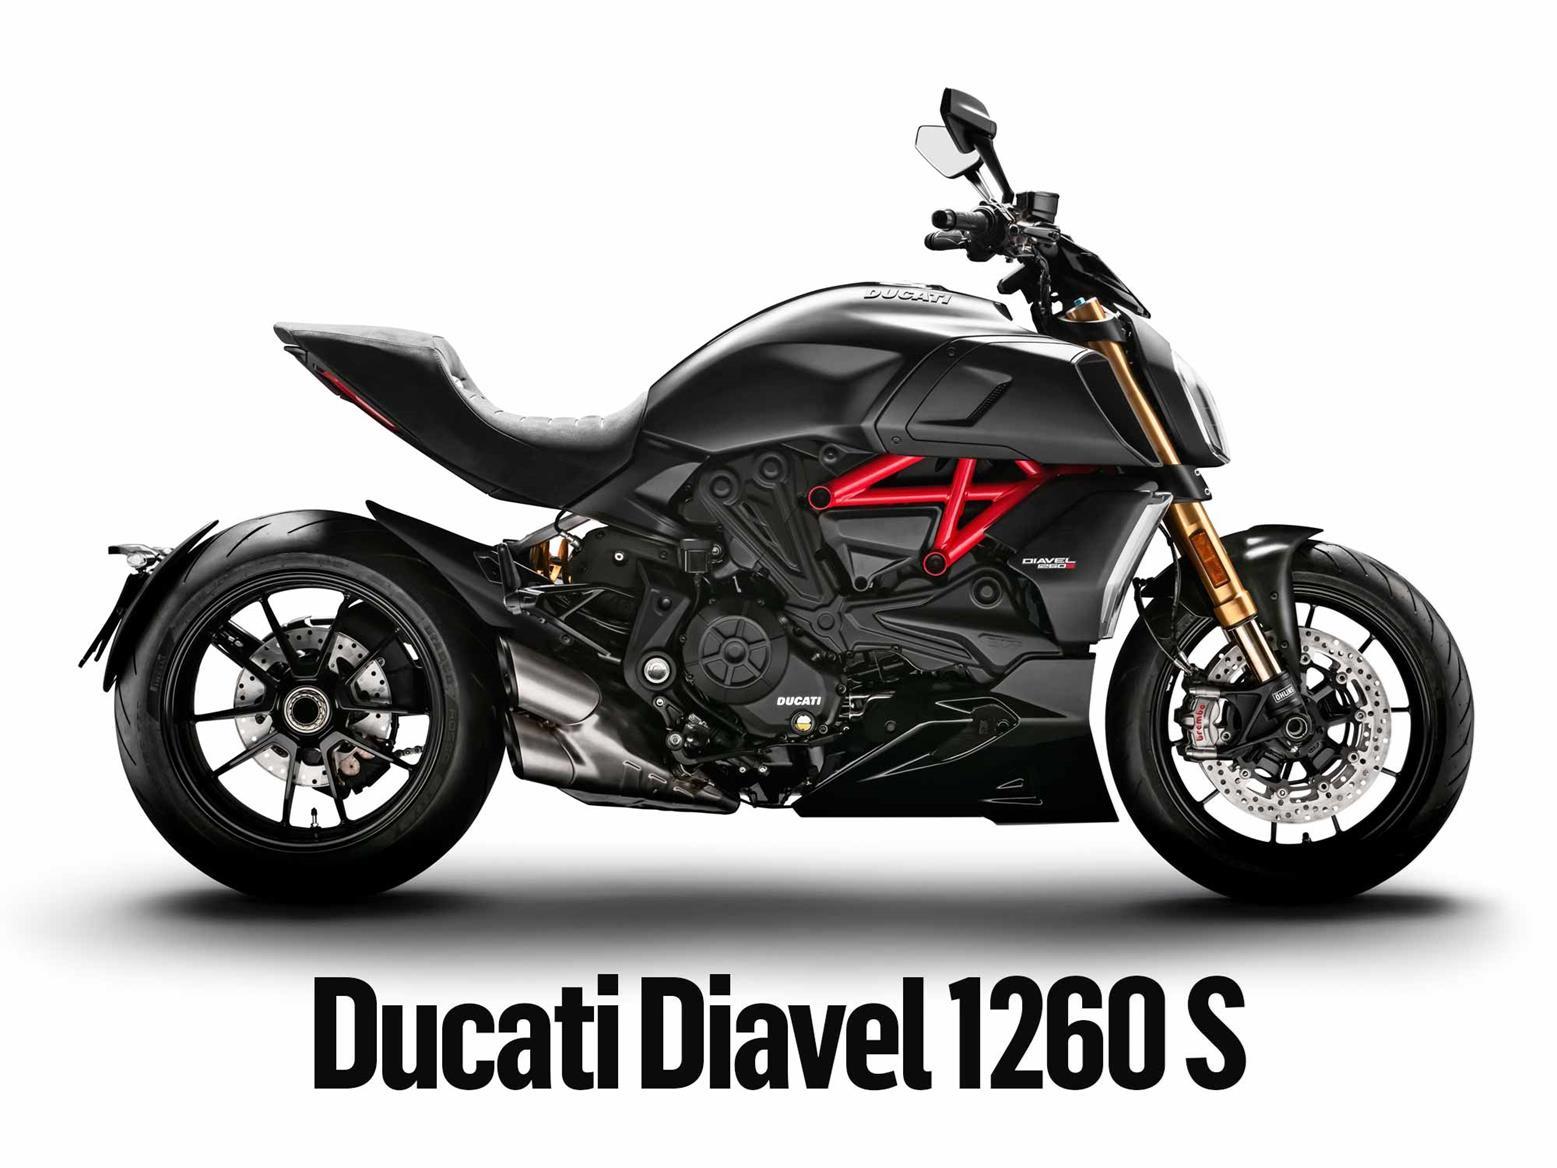 Read MCN's detailed Ducati Diavel 1260 S long-term test review here